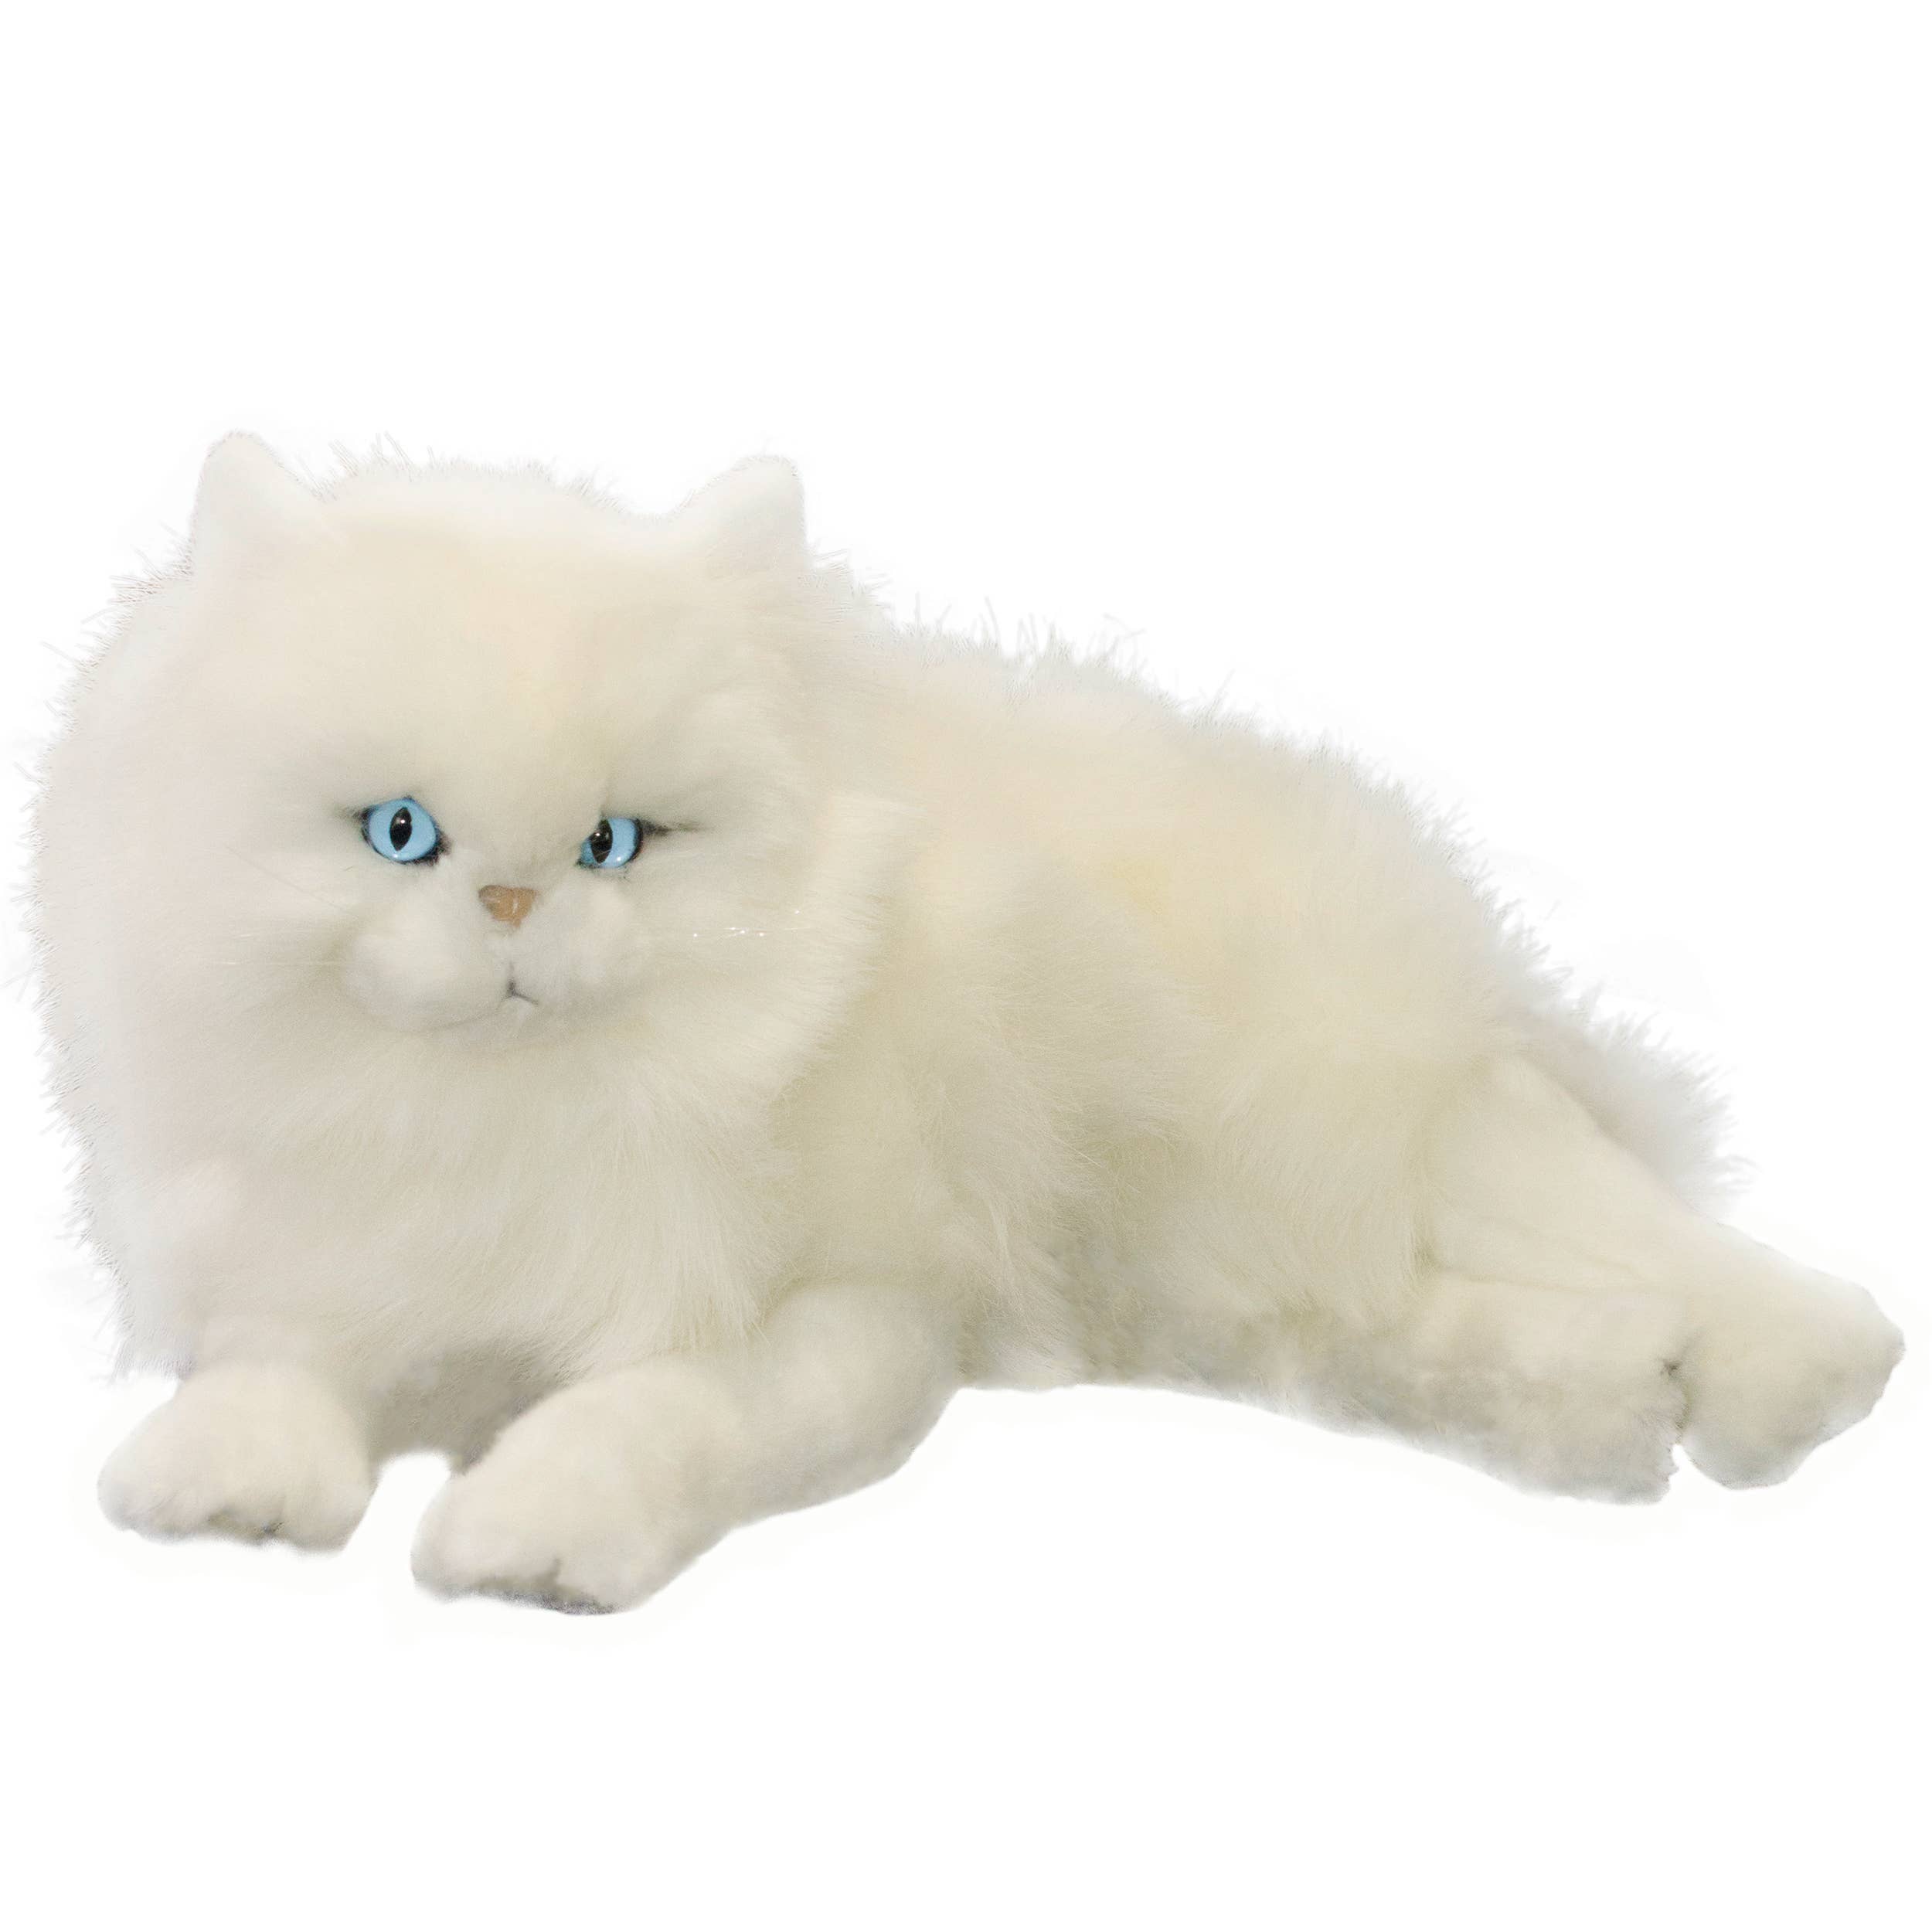 Persian Cats White and Black-Eco Friendly made from Recycled Plastic!